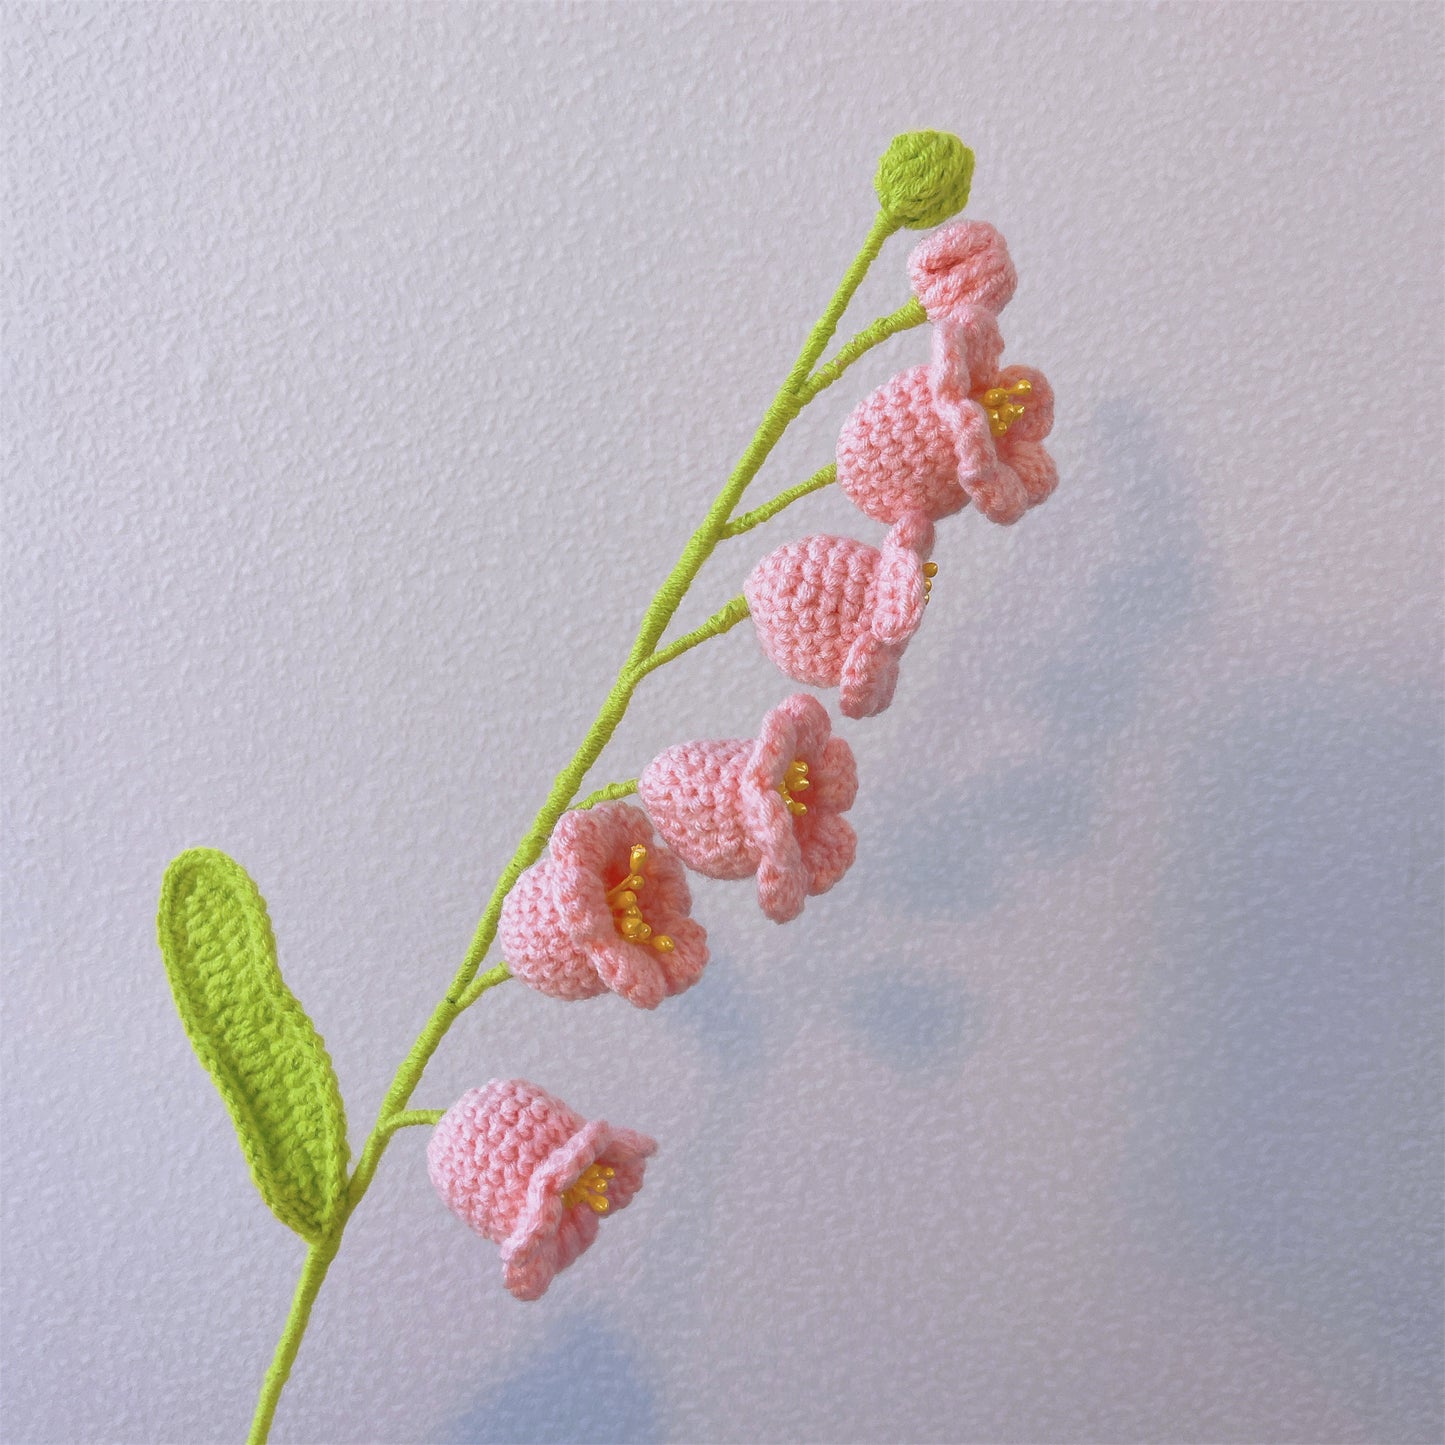 Handmade Lily of the Valley Stake for Garden Decoration and Plant Support - Crochet Yarn Craft, Purity, Innocence, Humility, Flower Meaning